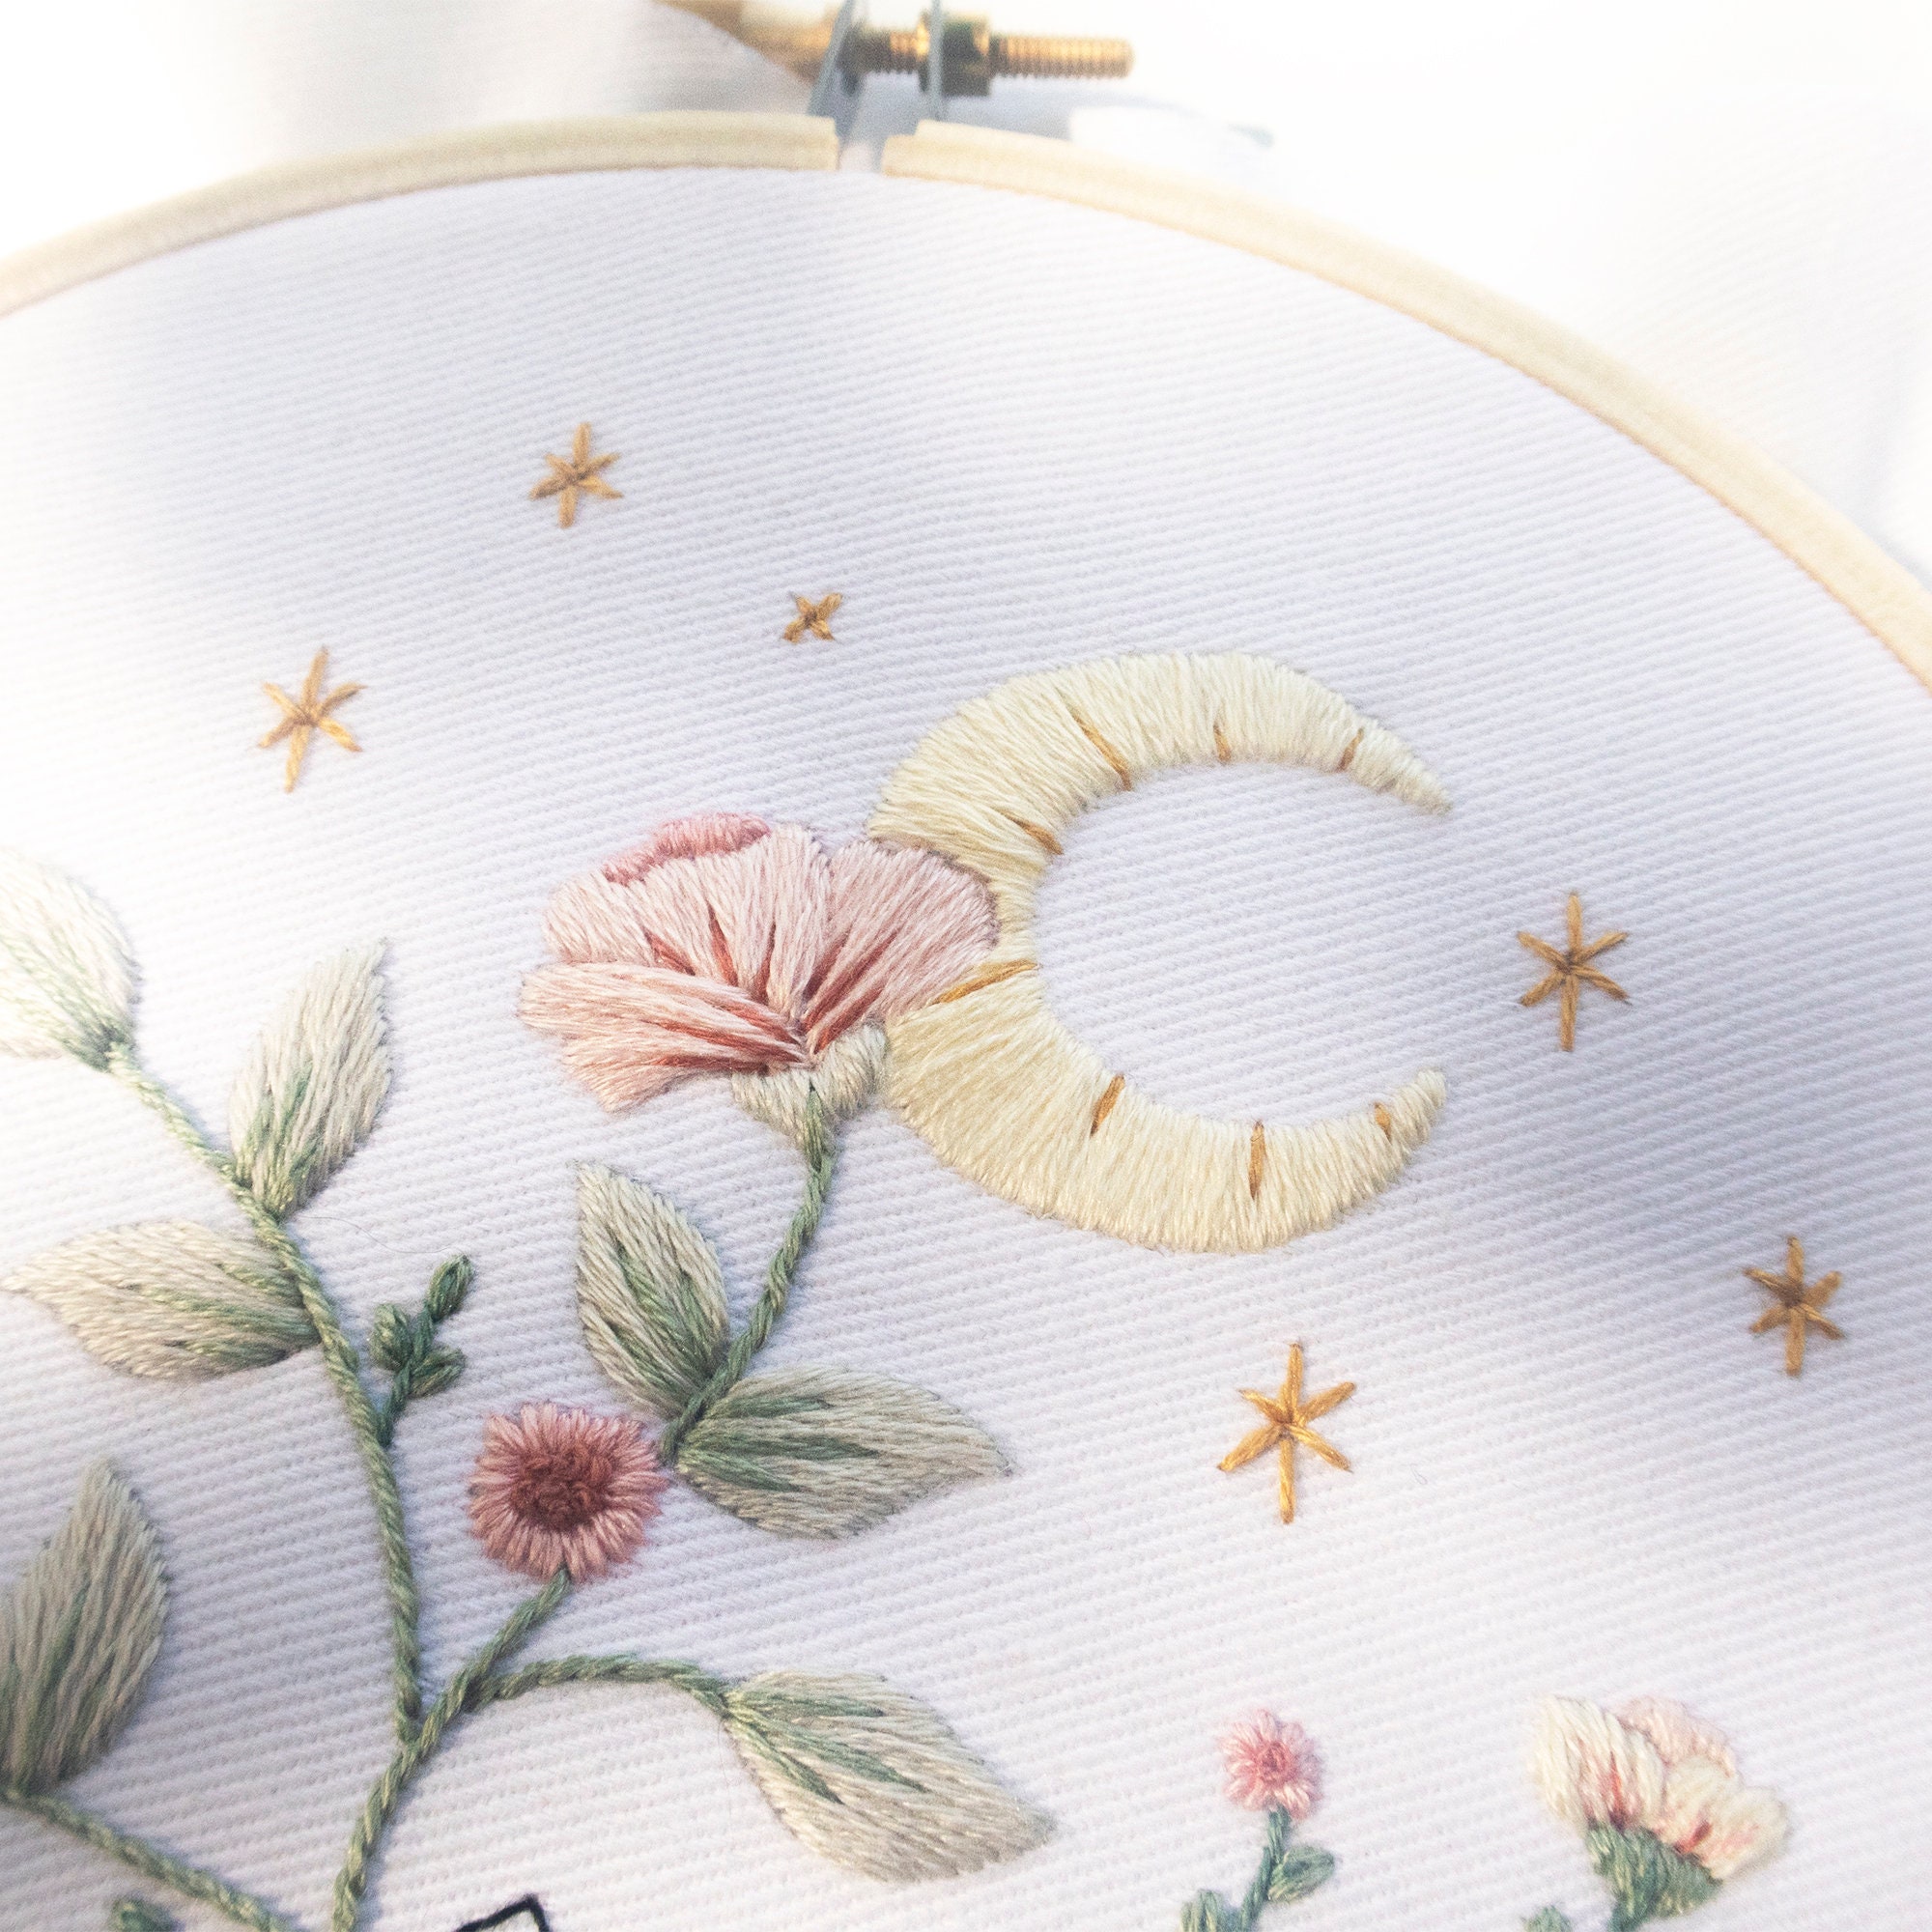 Books are Magic Embroidery Kit – Emily June